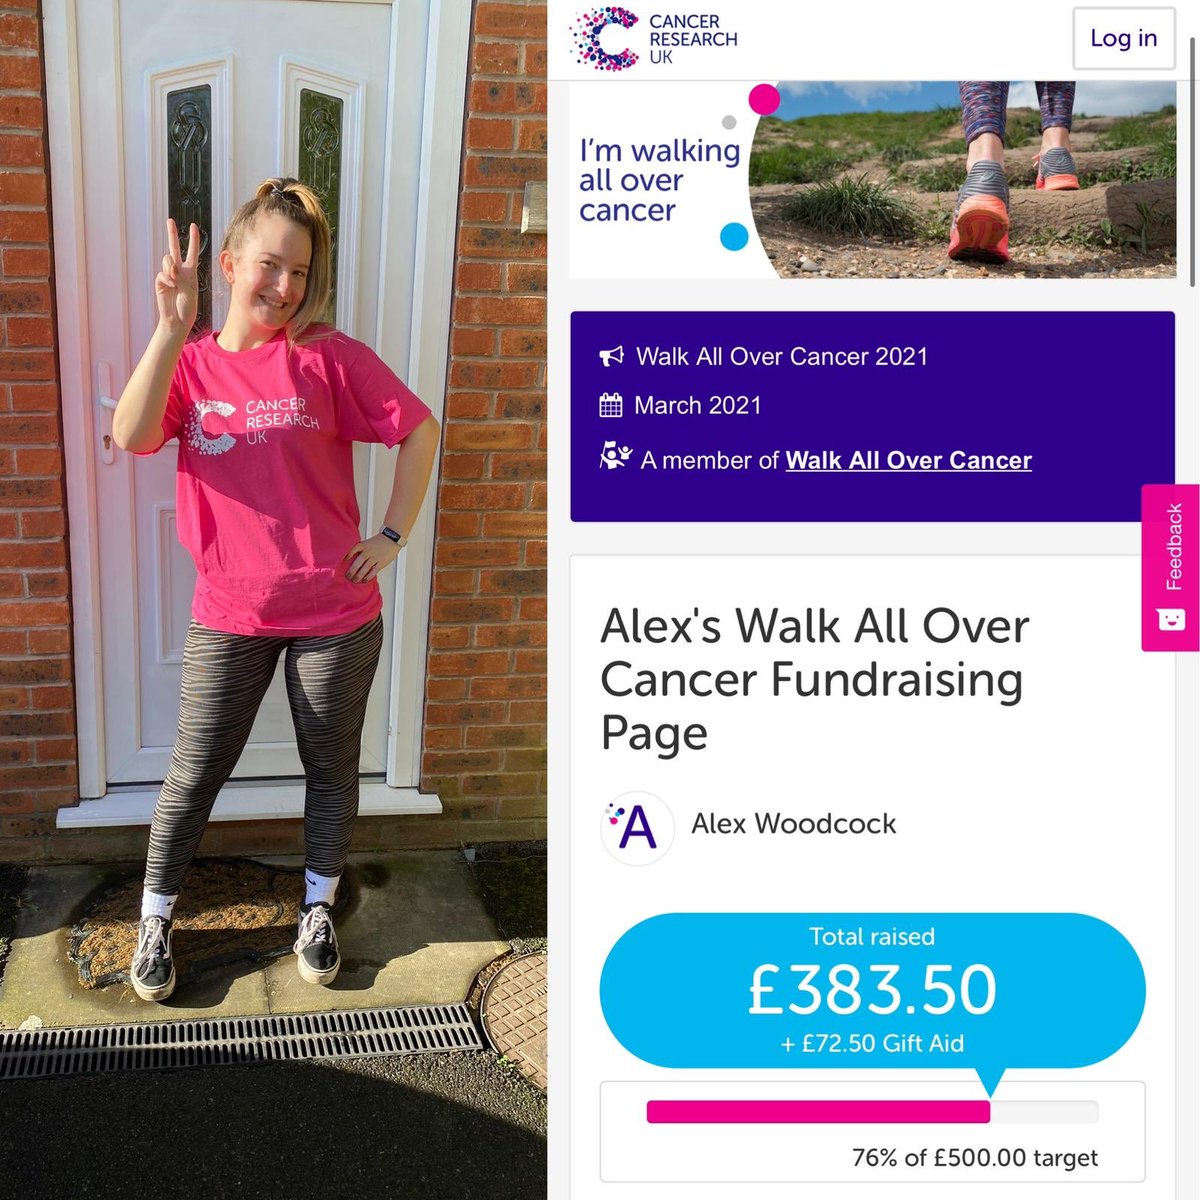 One of our regulars Alex is set to take part in Cancer Research U.K’s Walk All Over Cancer💓

All donations would be greatly appreciated, please see the link below! 

fundraise.cancerresearchuk.org/page/alexs-wal…

#WalkAllOverCancer #VirtualFundraiser